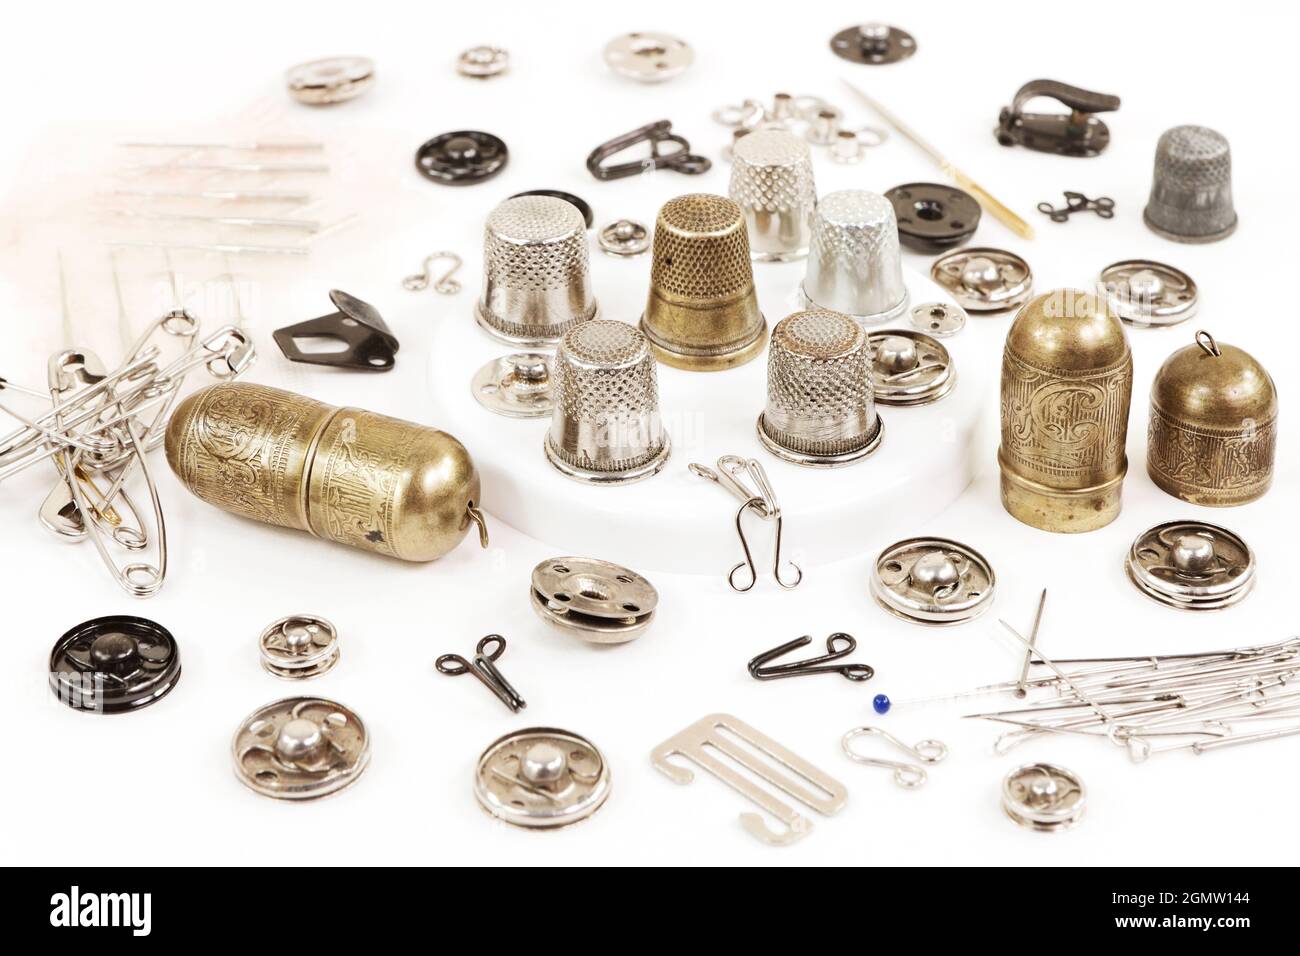 Metal objects for sewing: needles, thimbles, fasteners, buttons, hooks, pins Stock Photo